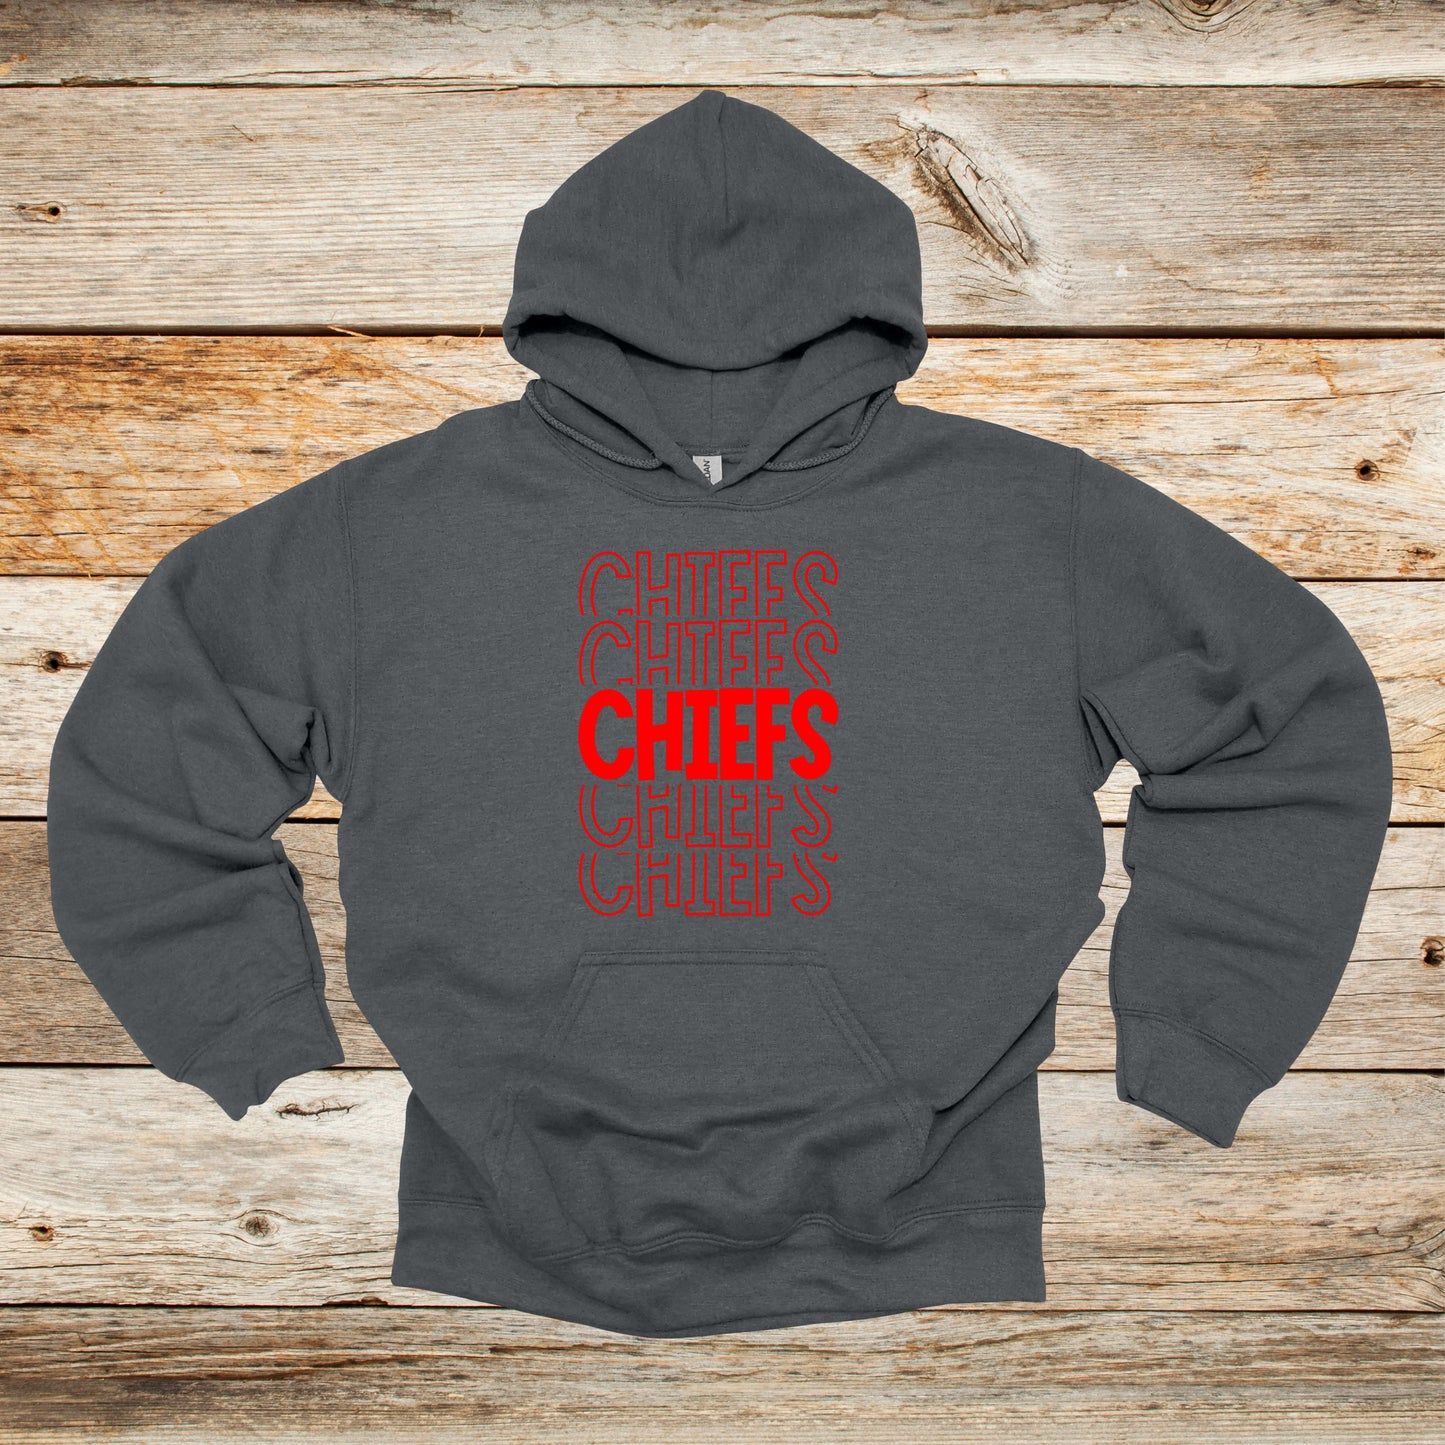 Football Crewneck and Hooded Sweatshirt - Chiefs Football - Chiefs - Adult and Children's Tee Shirts - Sports Hooded Sweatshirt Graphic Avenue Hooded Sweatshirt Dark Heather Adult Small